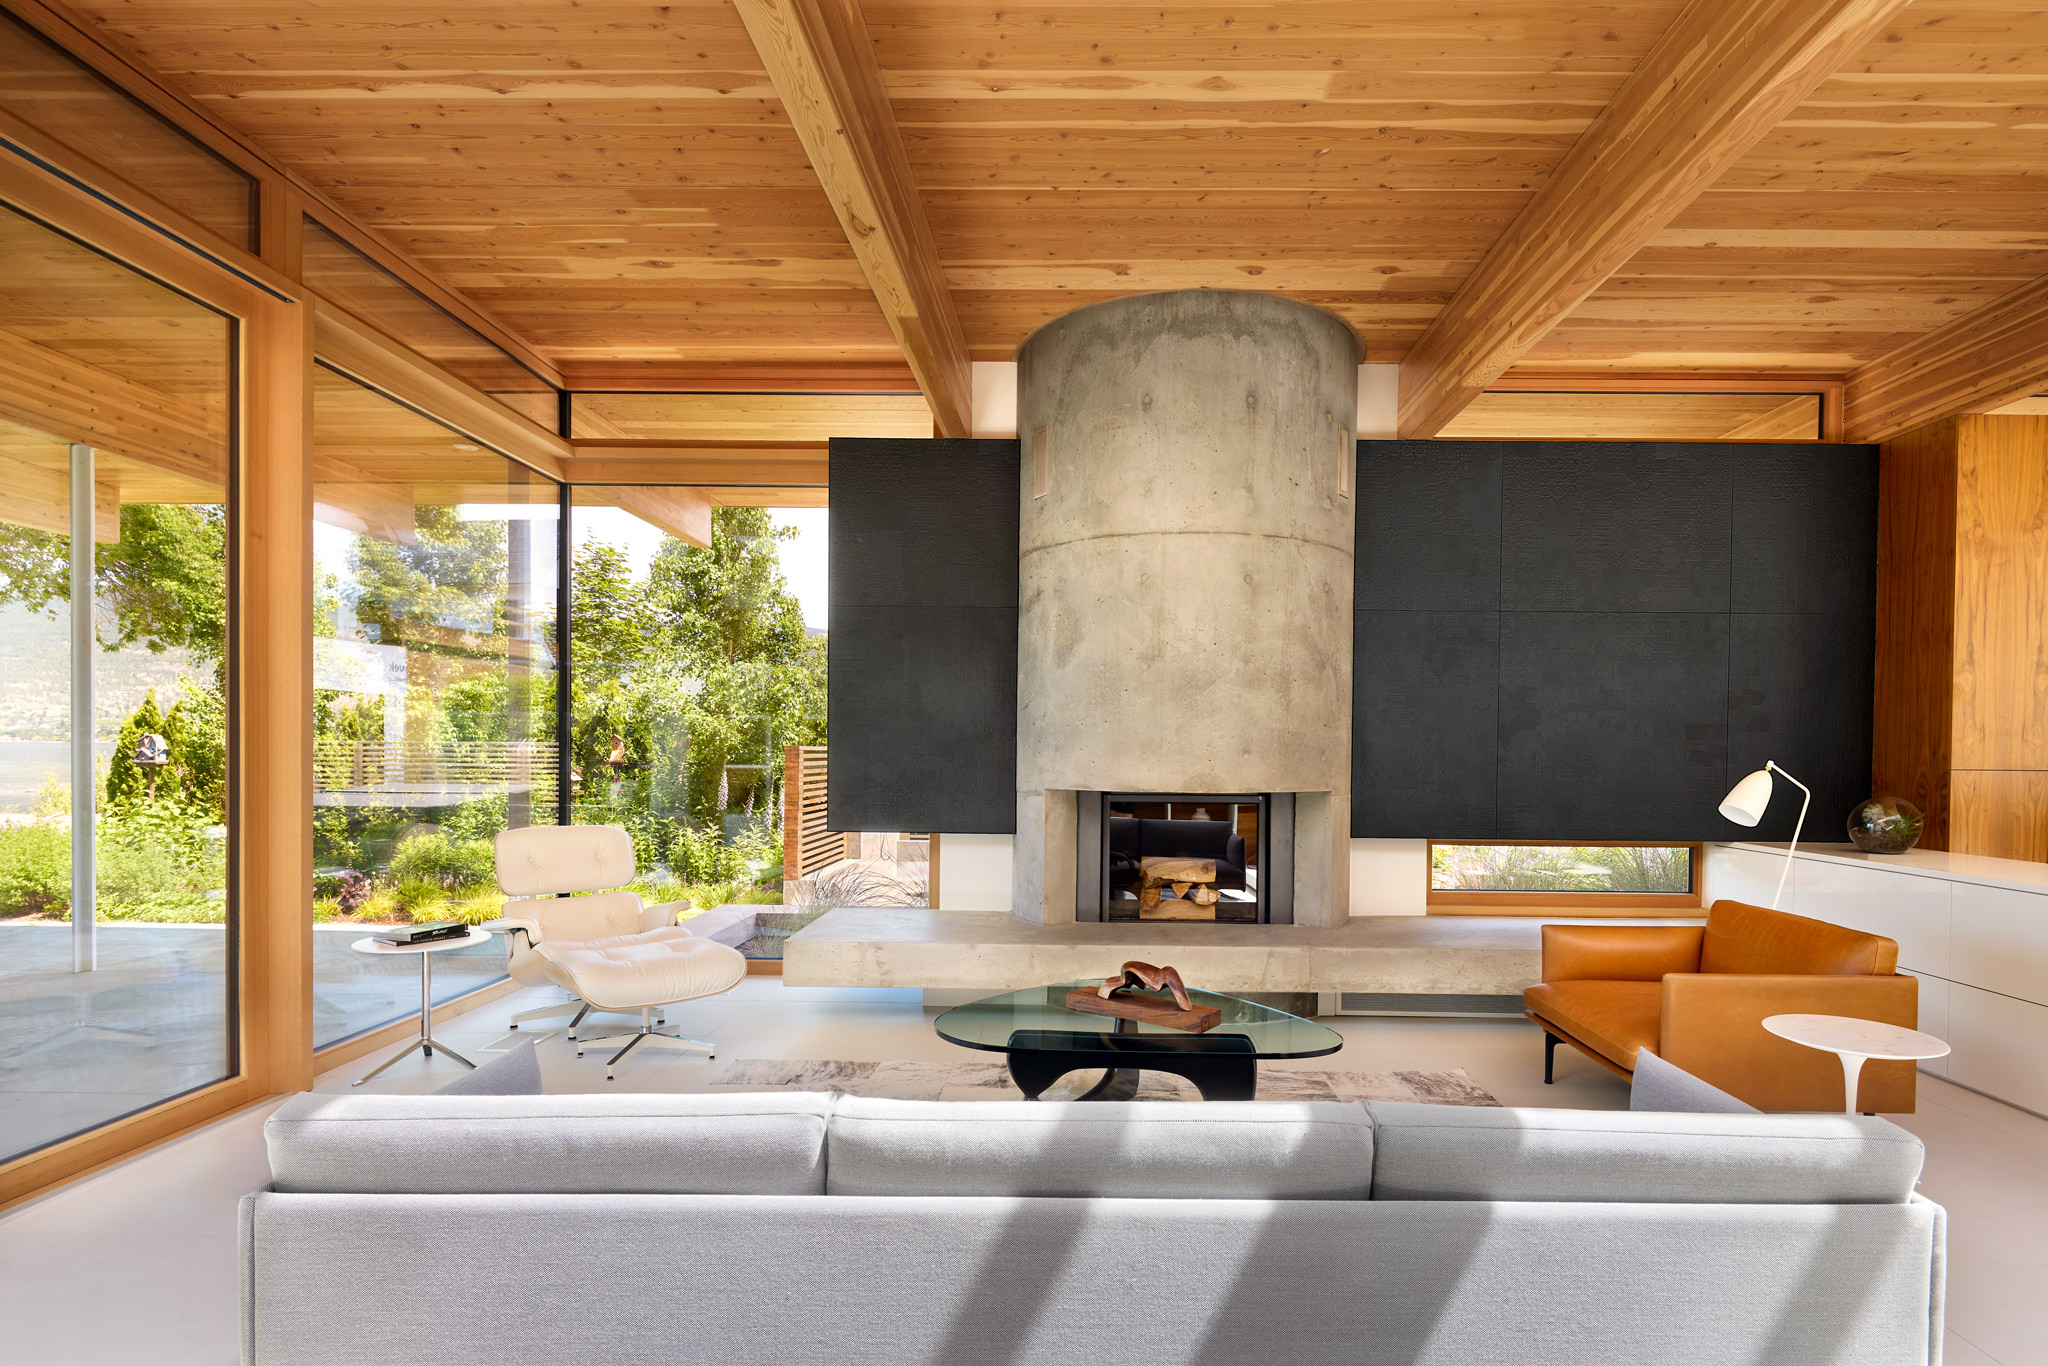 Interior view of modern residence living room with wood ceiling and circular concrete fireplace